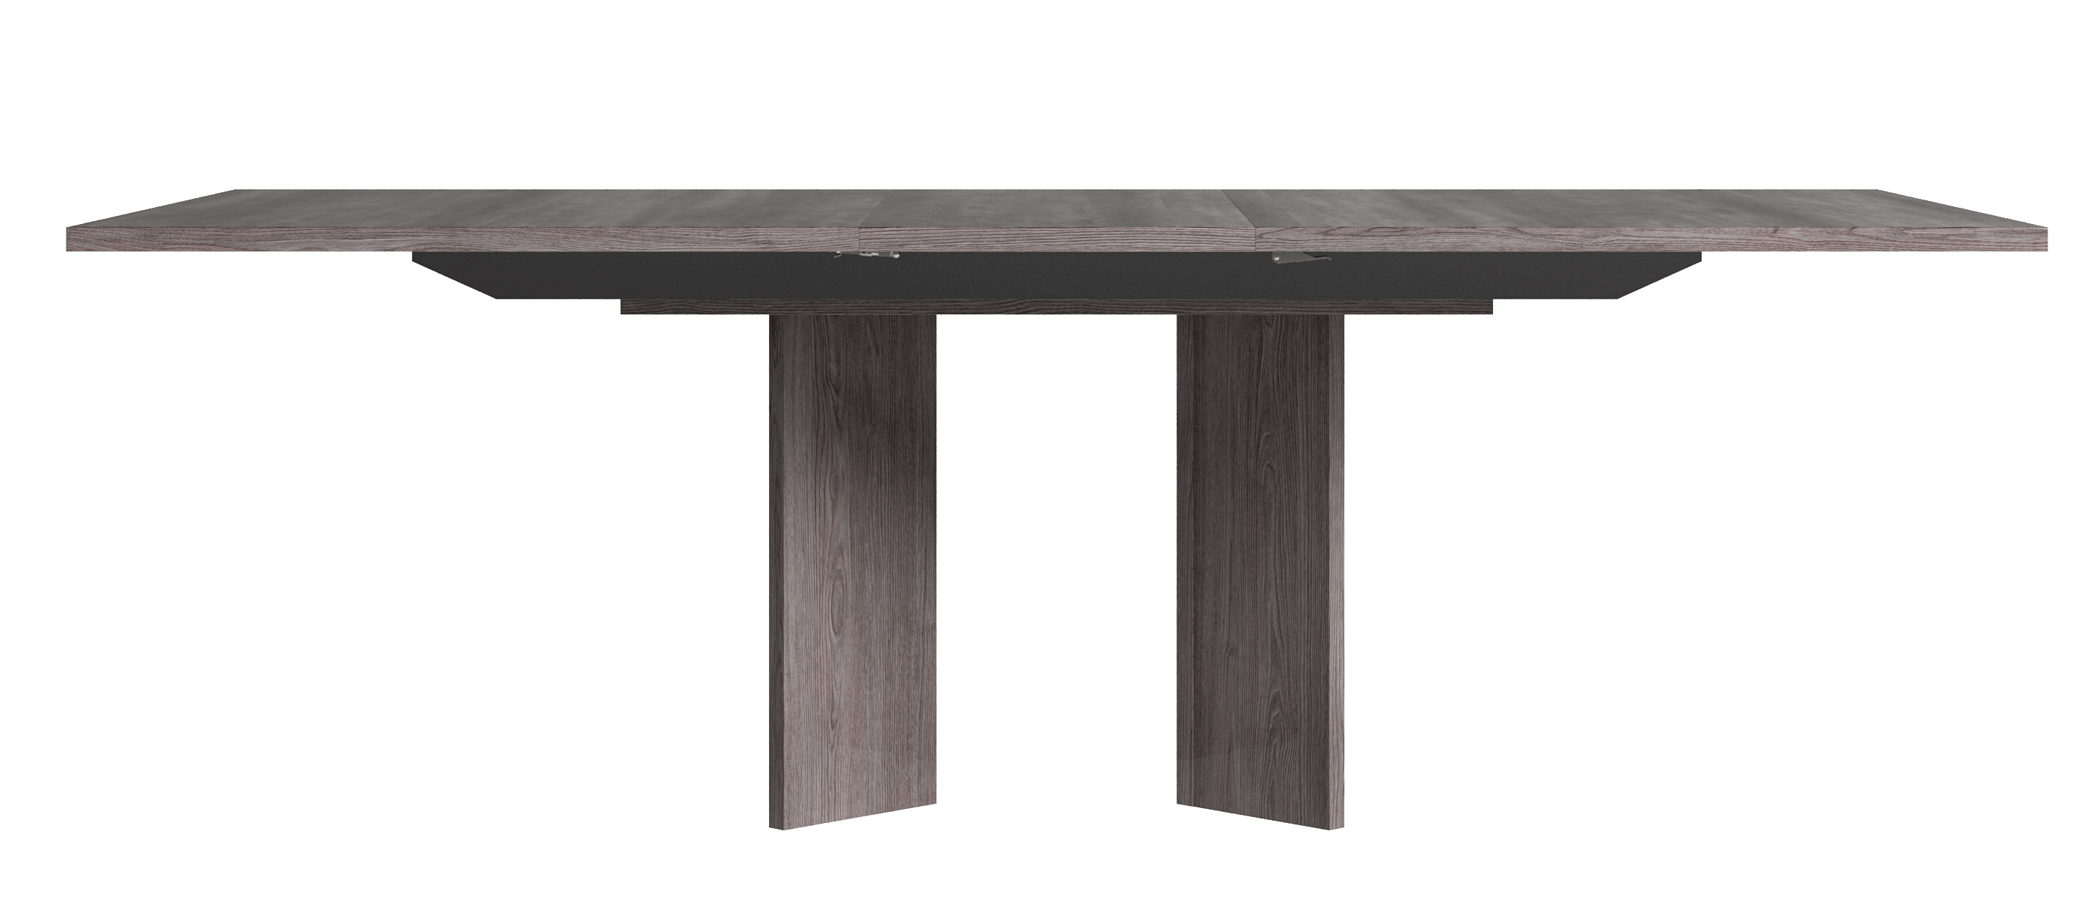 Clearance Dining Room Viola Dining table